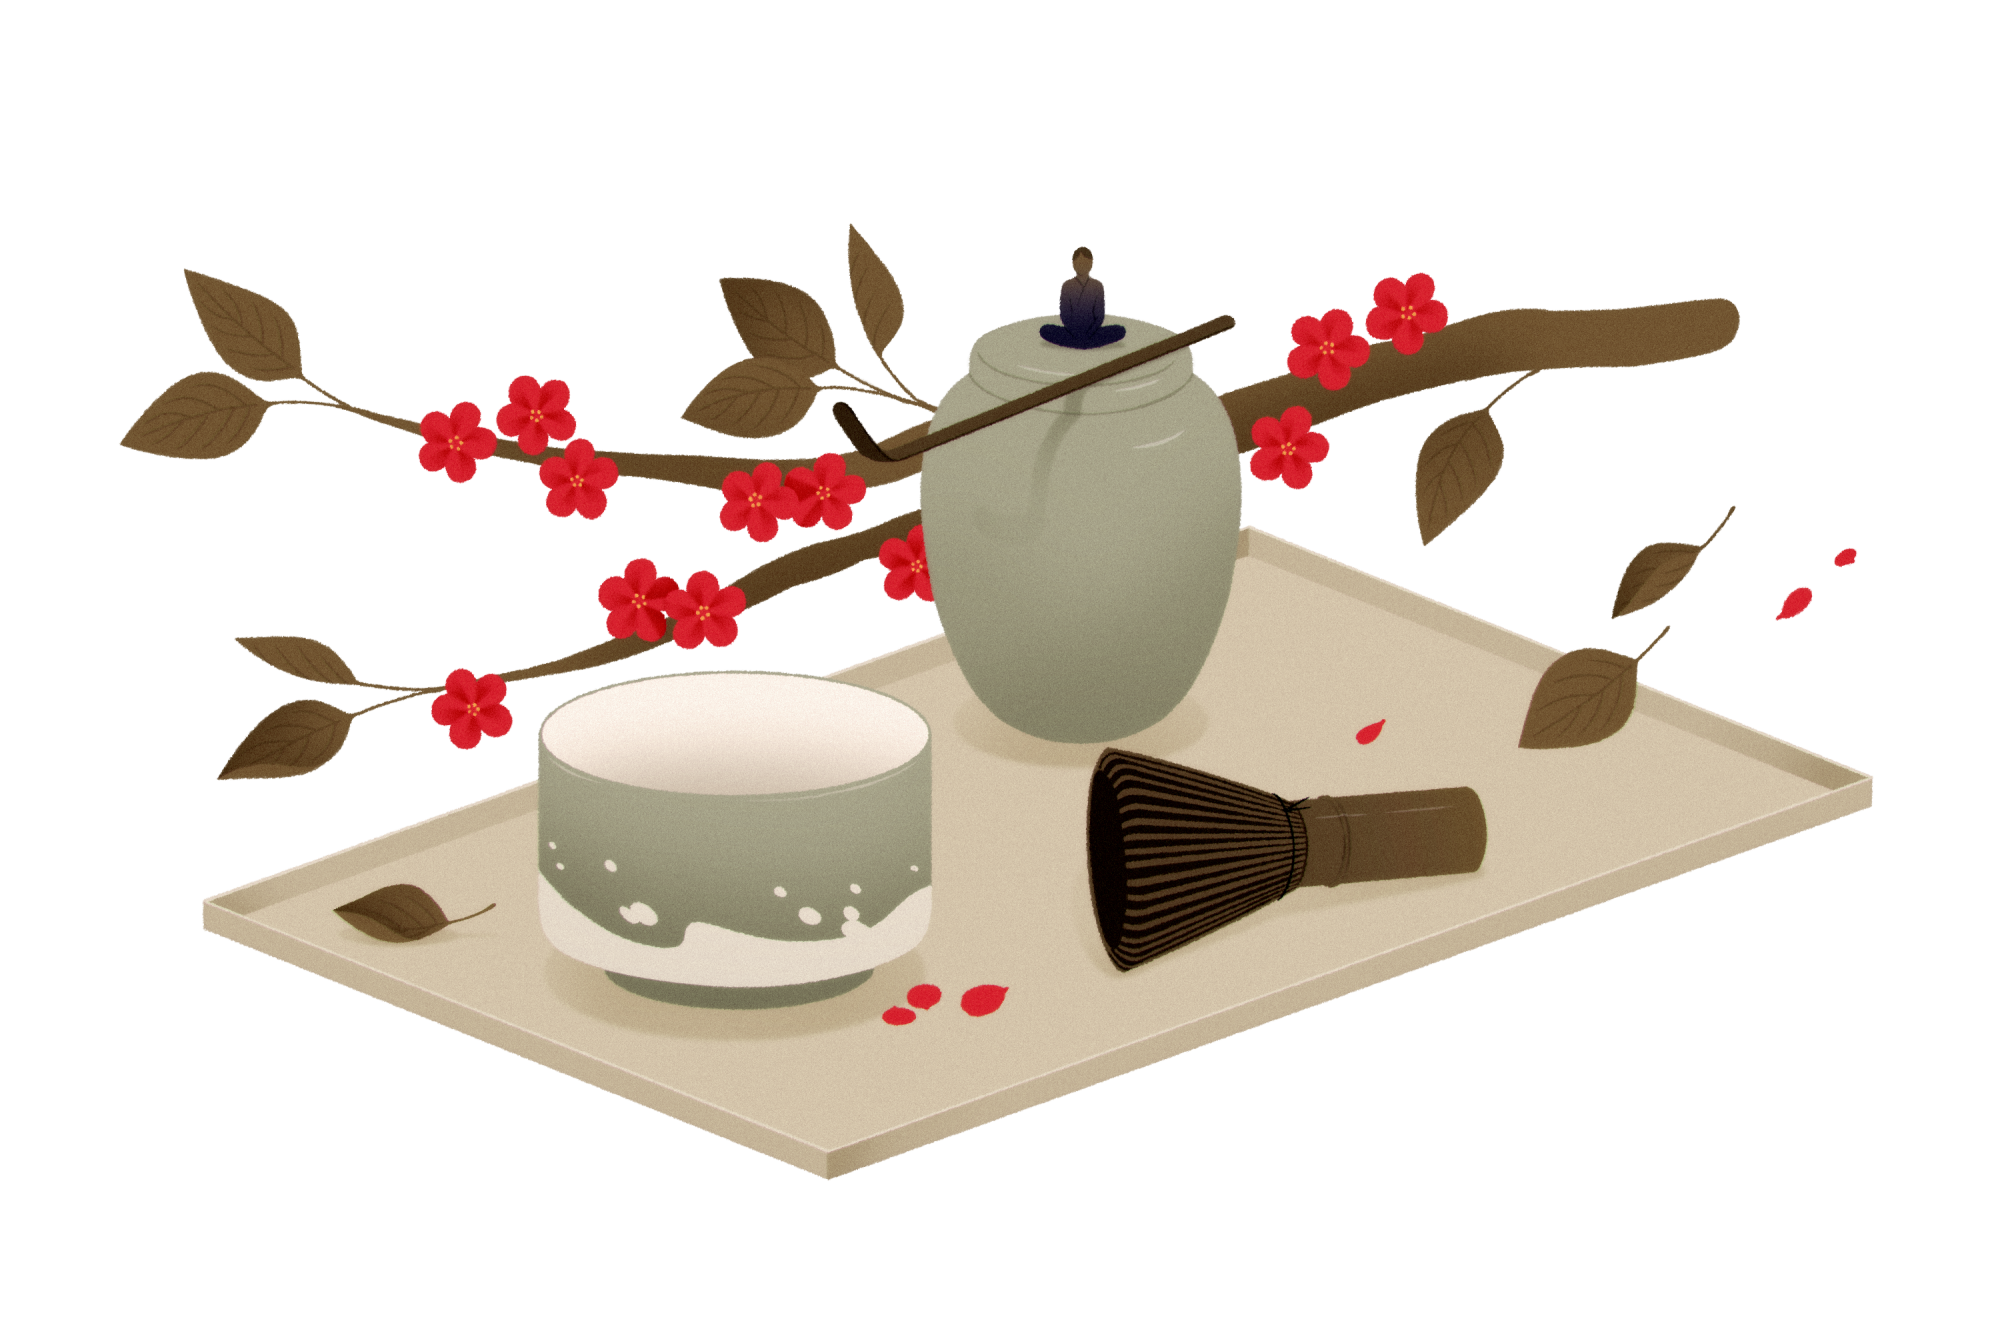 A tray with a Japanese tea set and a cherry tree branch with blossoms